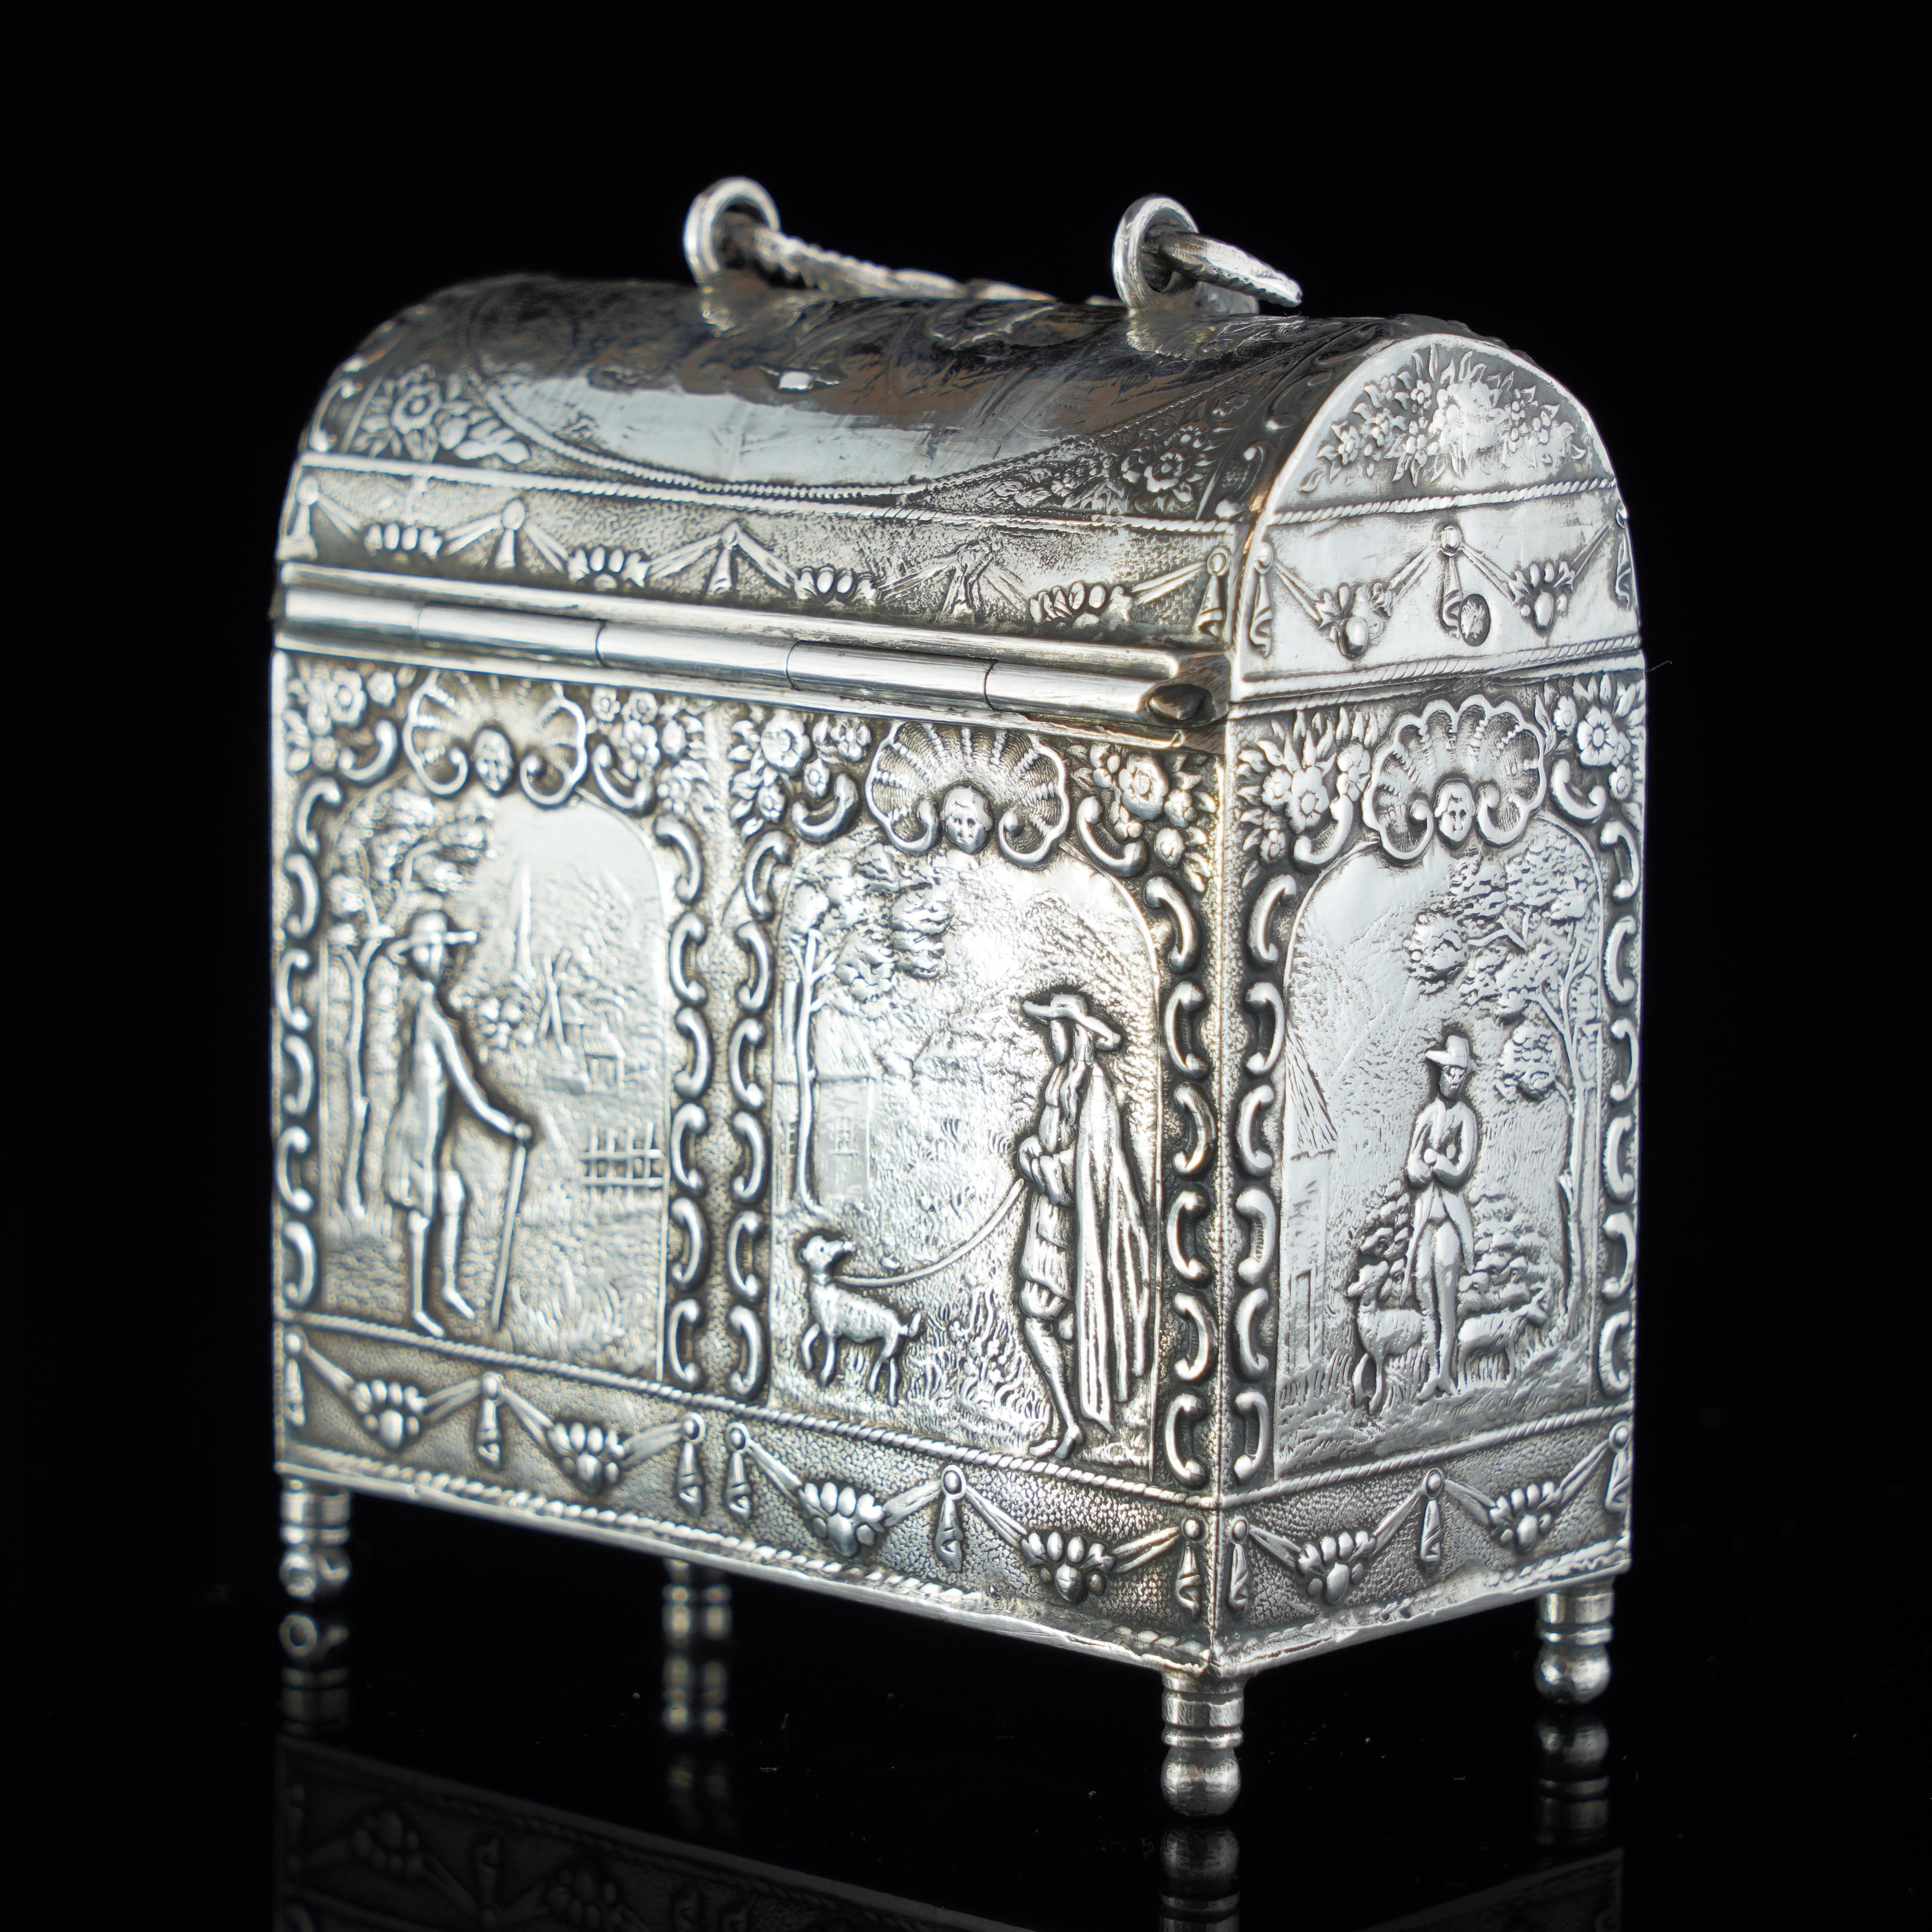 Antique Dutch silver tea caddy in the shape of a chest box, decorated with repoussé figural scene.

The surface of this tea caddy is embellished with embossed panels depicting figures at leisure in rural settings.
The surface of the concaved